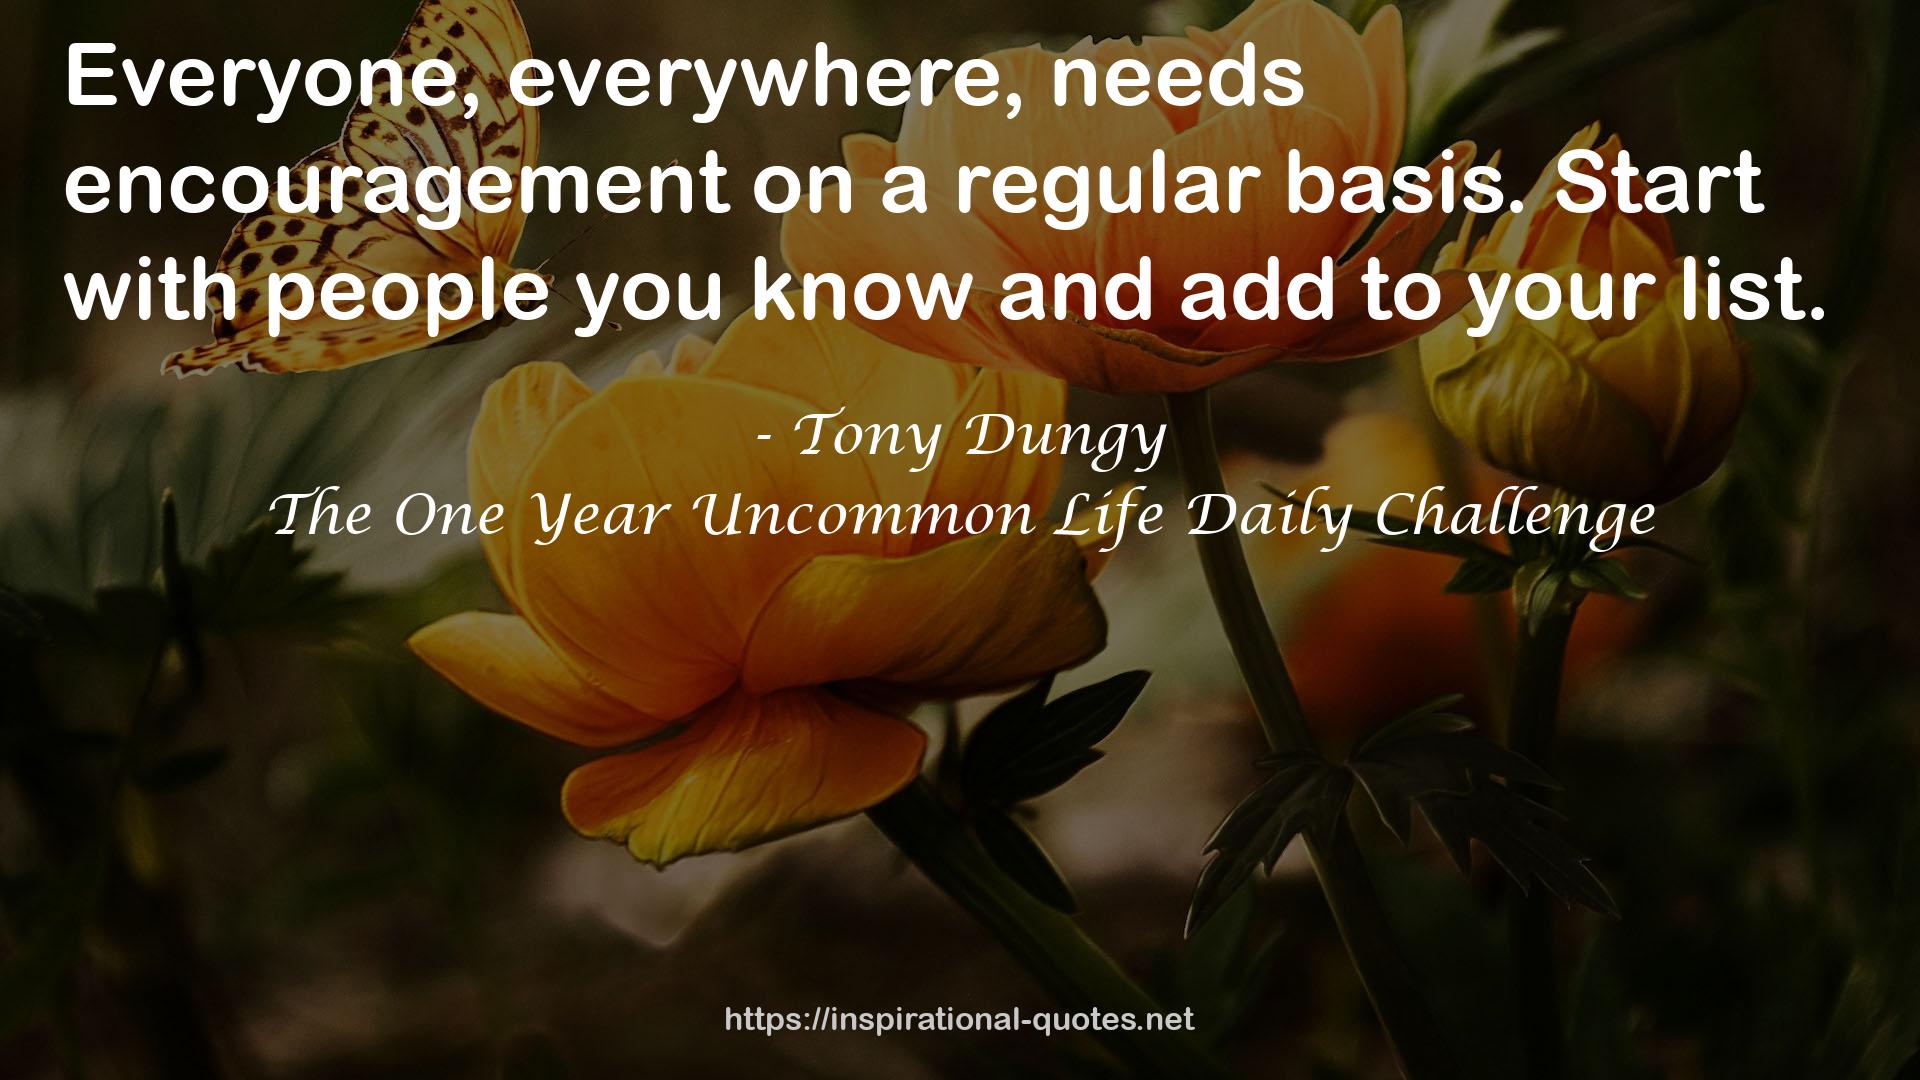 The One Year Uncommon Life Daily Challenge QUOTES